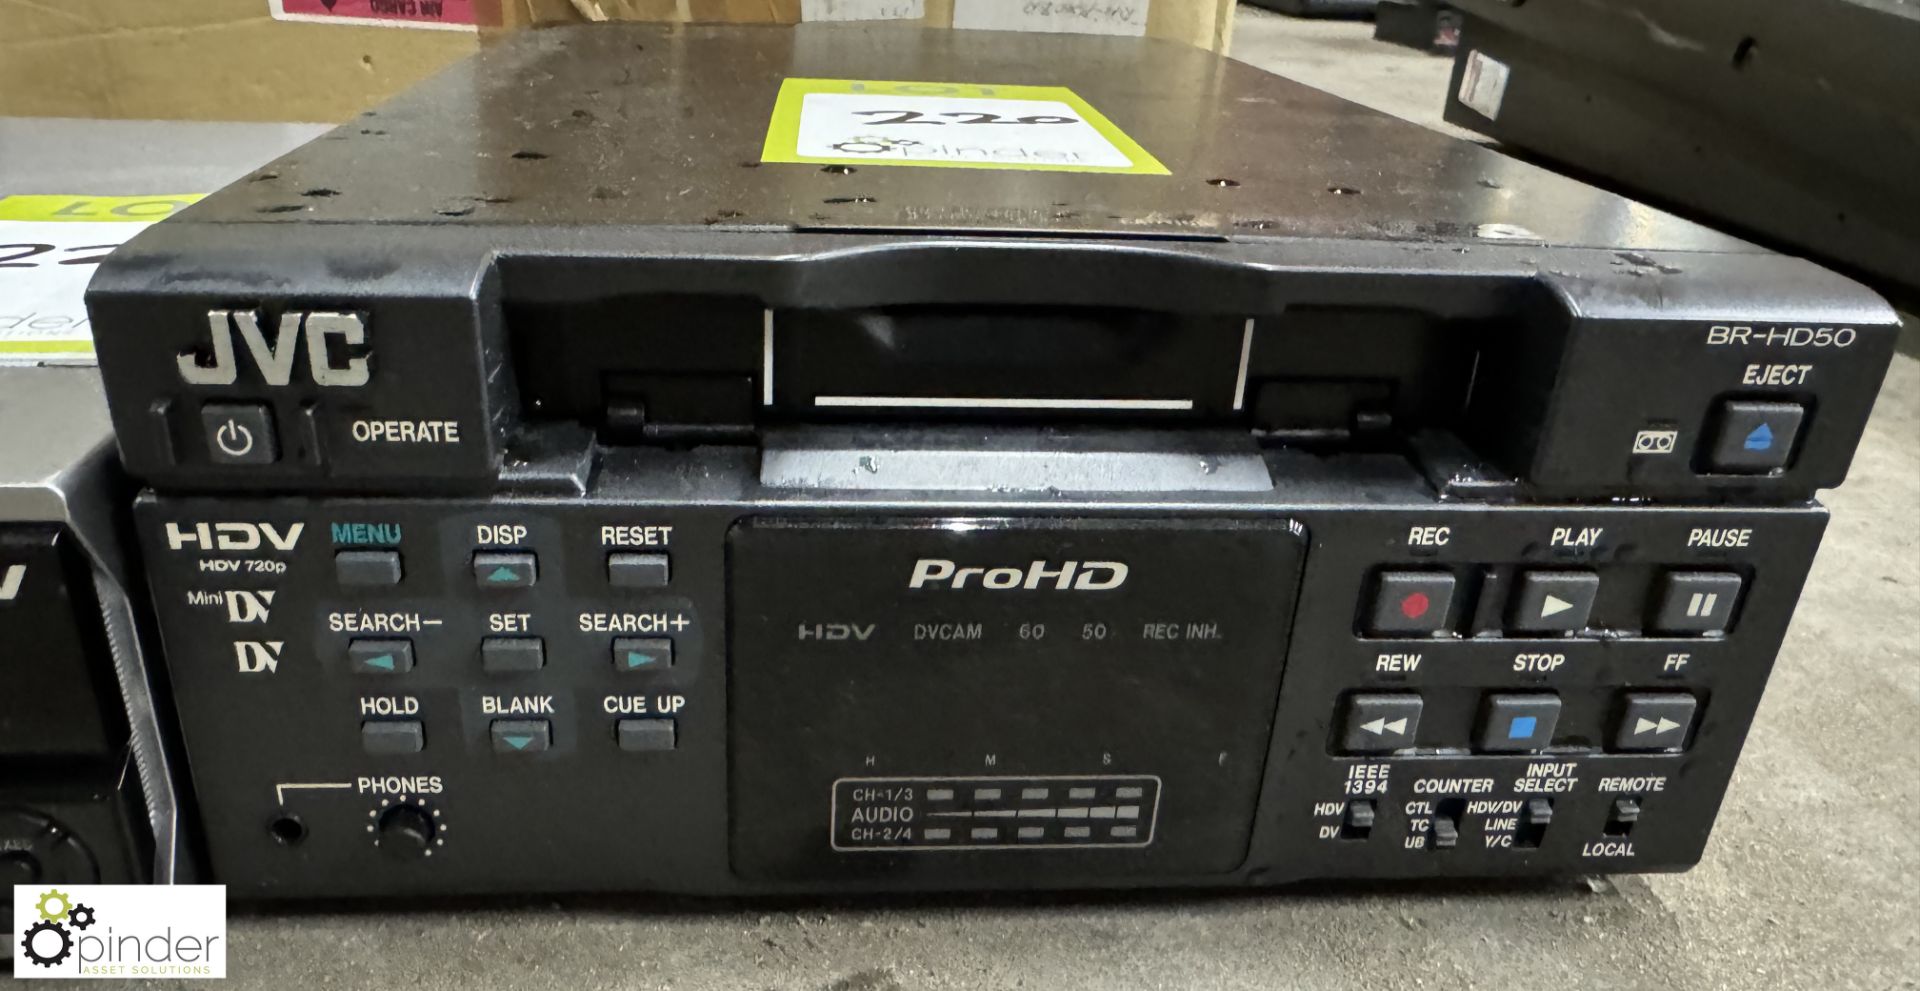 Sony HDV 1080i Digital HD Videocassette Recorder and JVC BR-HD50 DV Recorder - Image 3 of 4